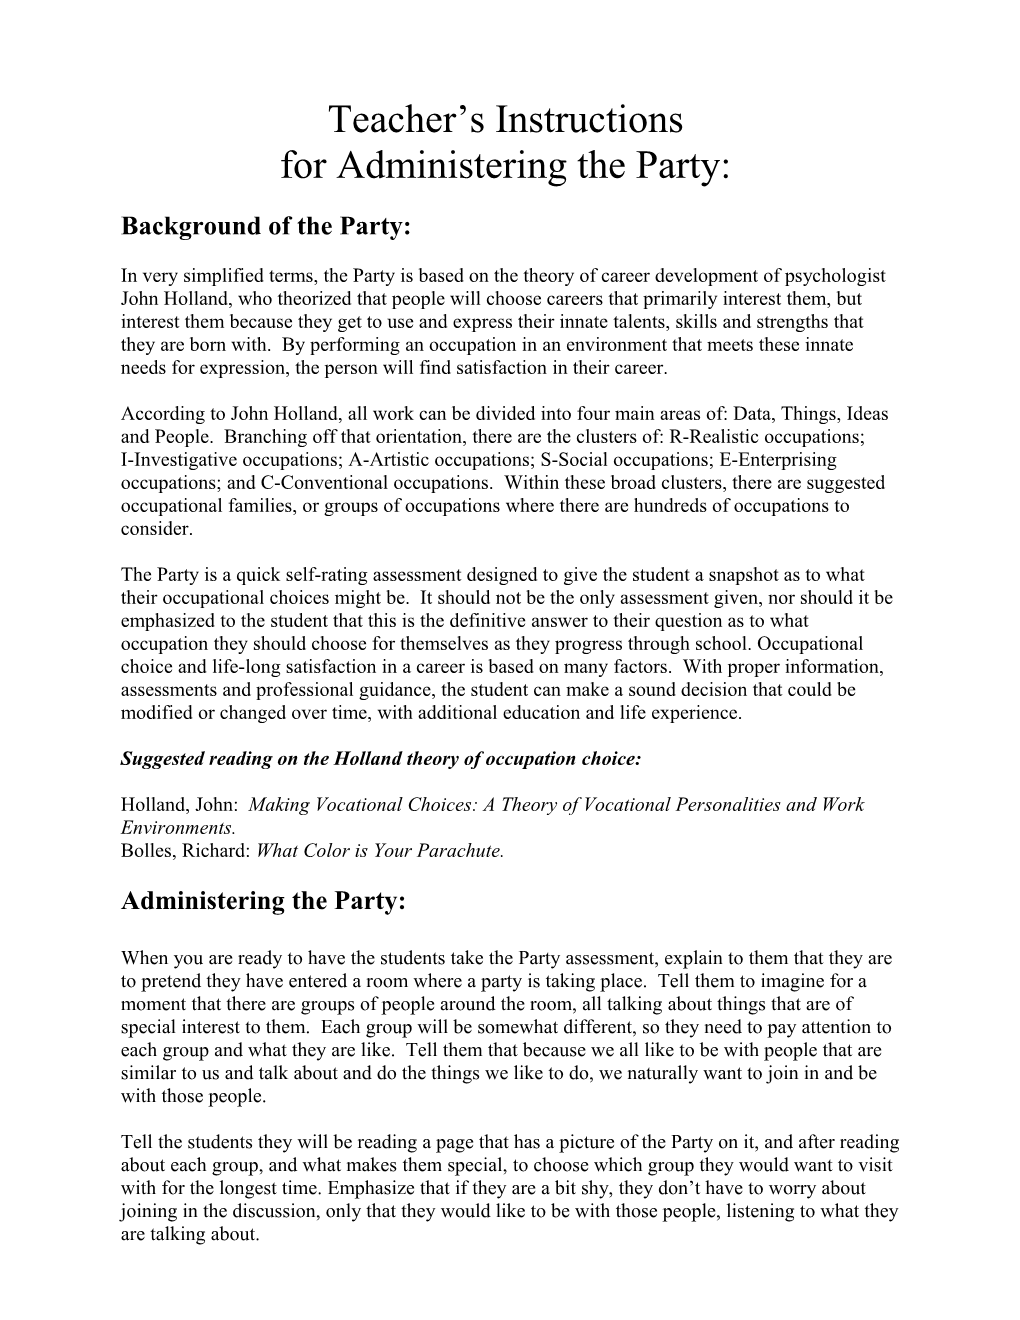 Instructions for Administering the Party